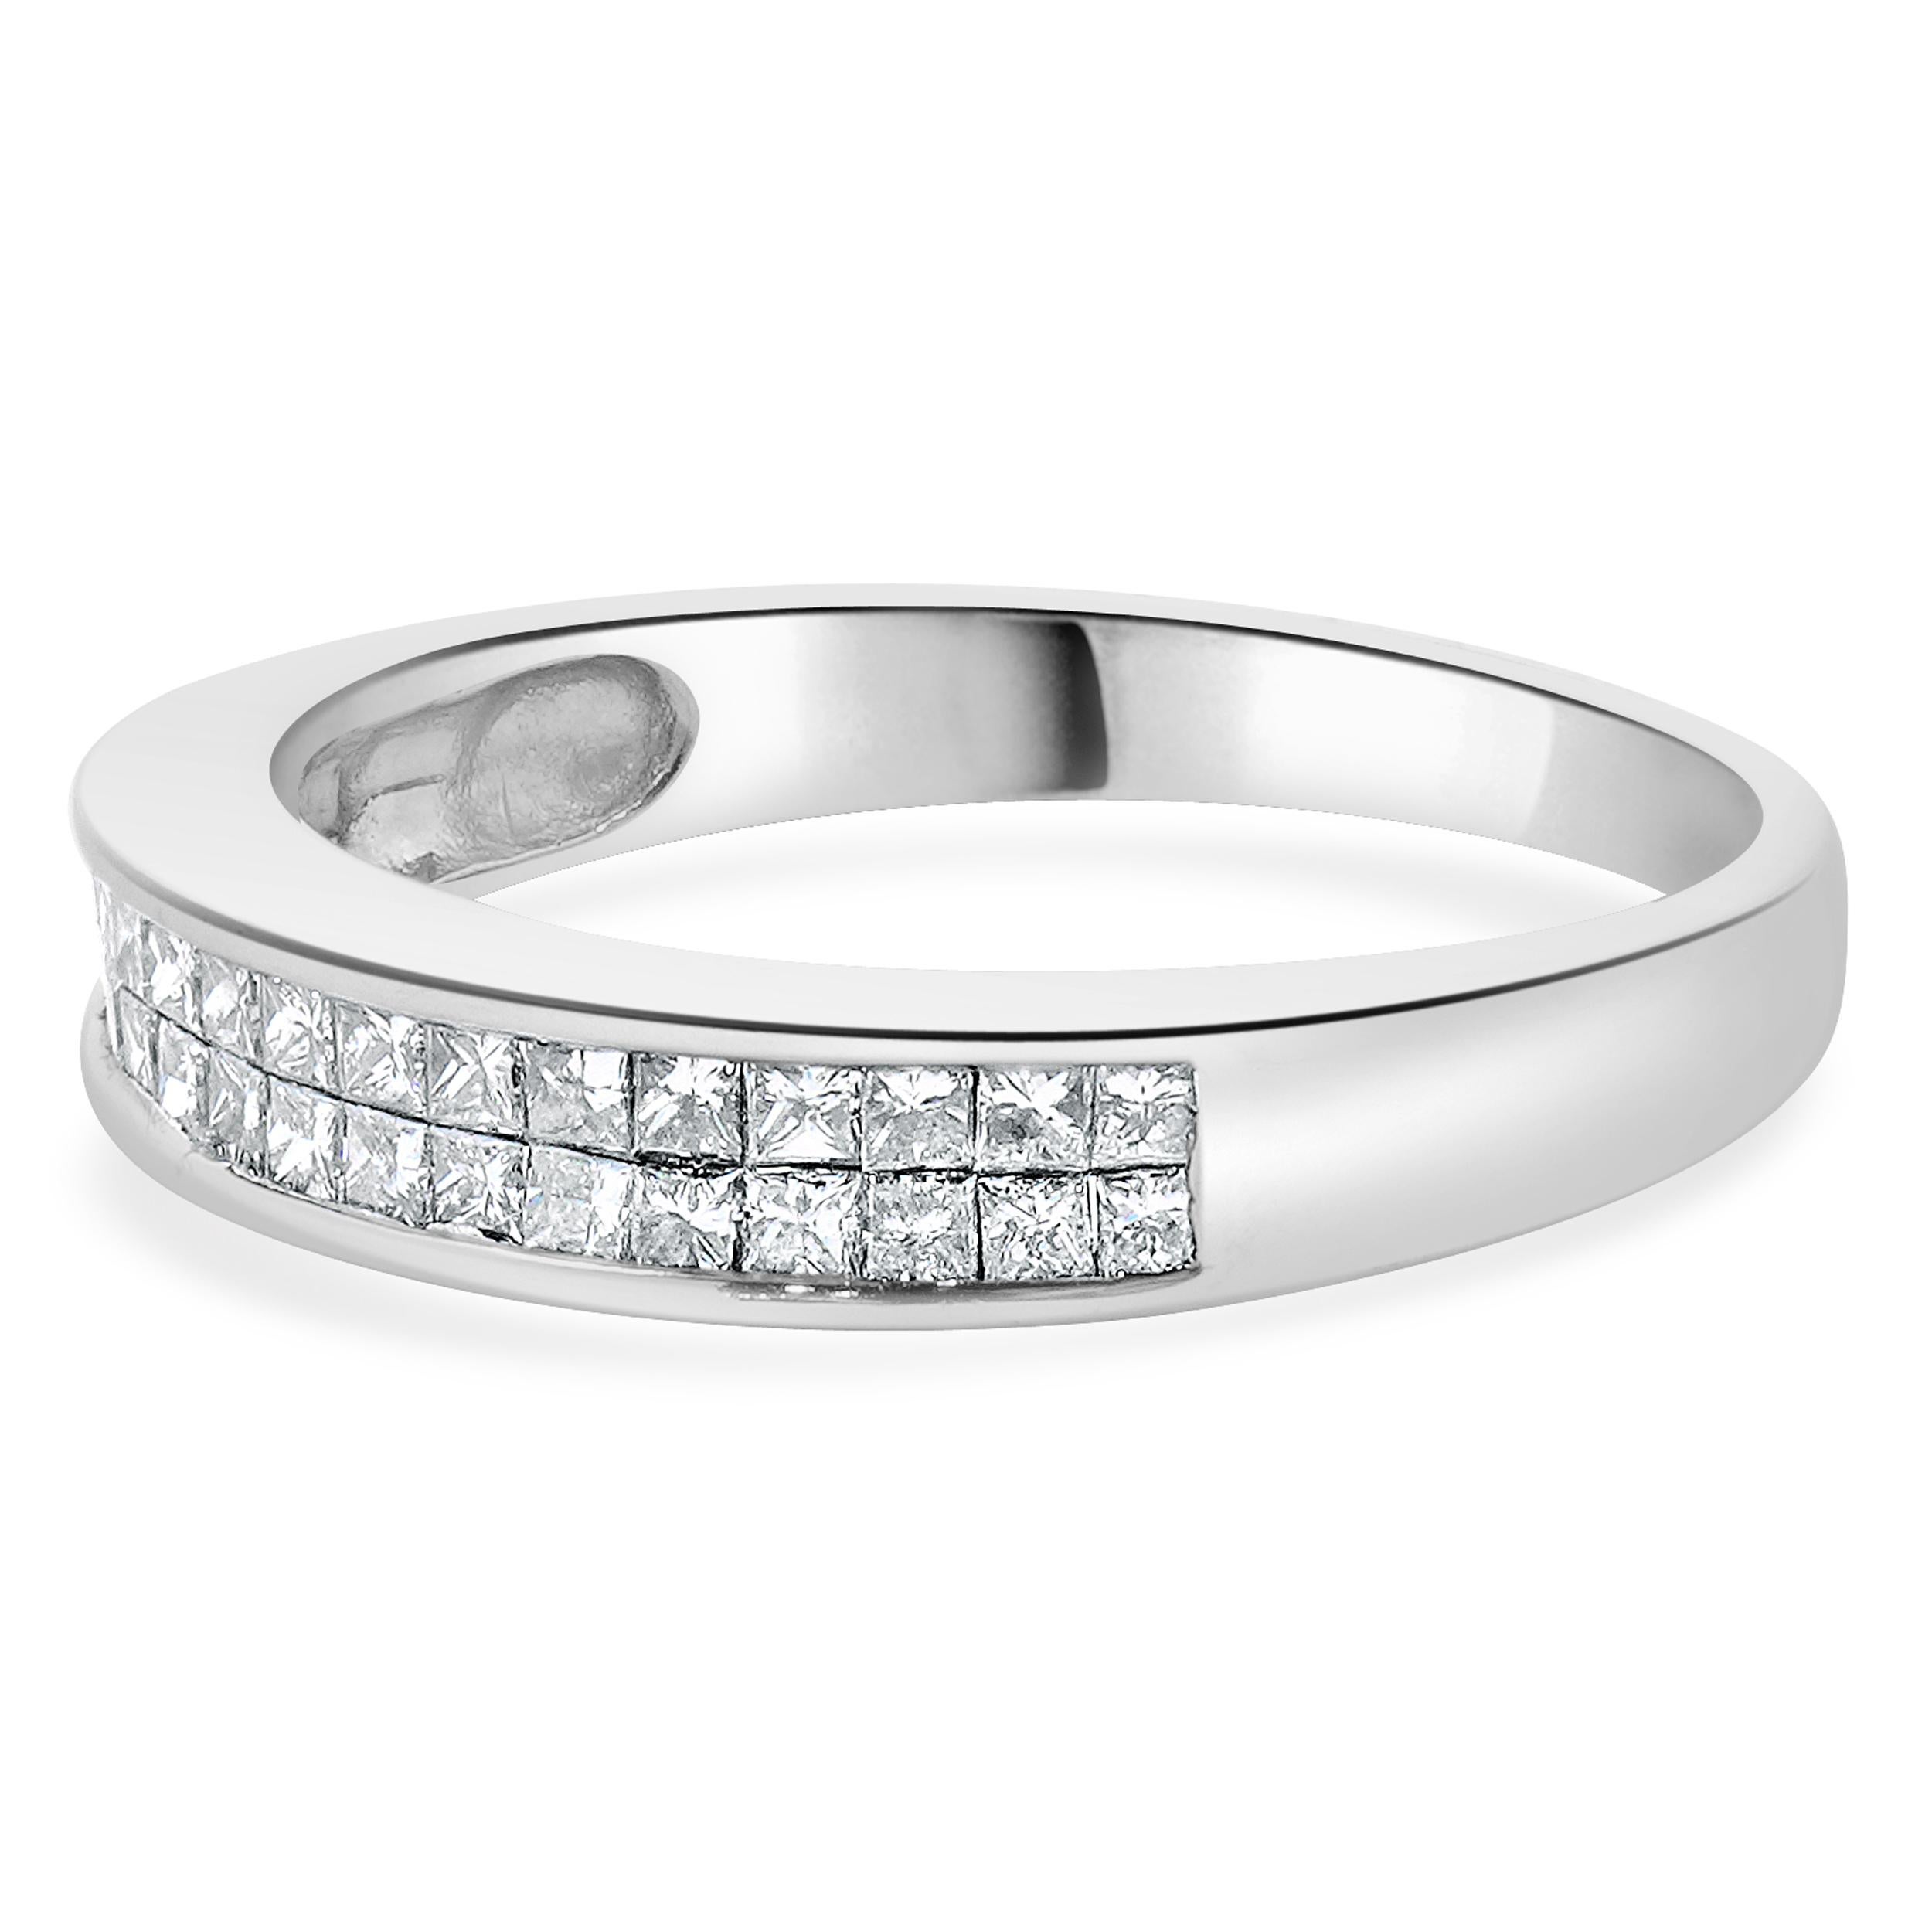 Designer: Custom
Material: 14K white gold
Diamonds: 36 princess cut = 0.90cttw
Color: H
Clarity: SI1-2
Size: 7.5 sizing available 
Dimensions: rings measures 4mm in width
Weight: 3.30 grams